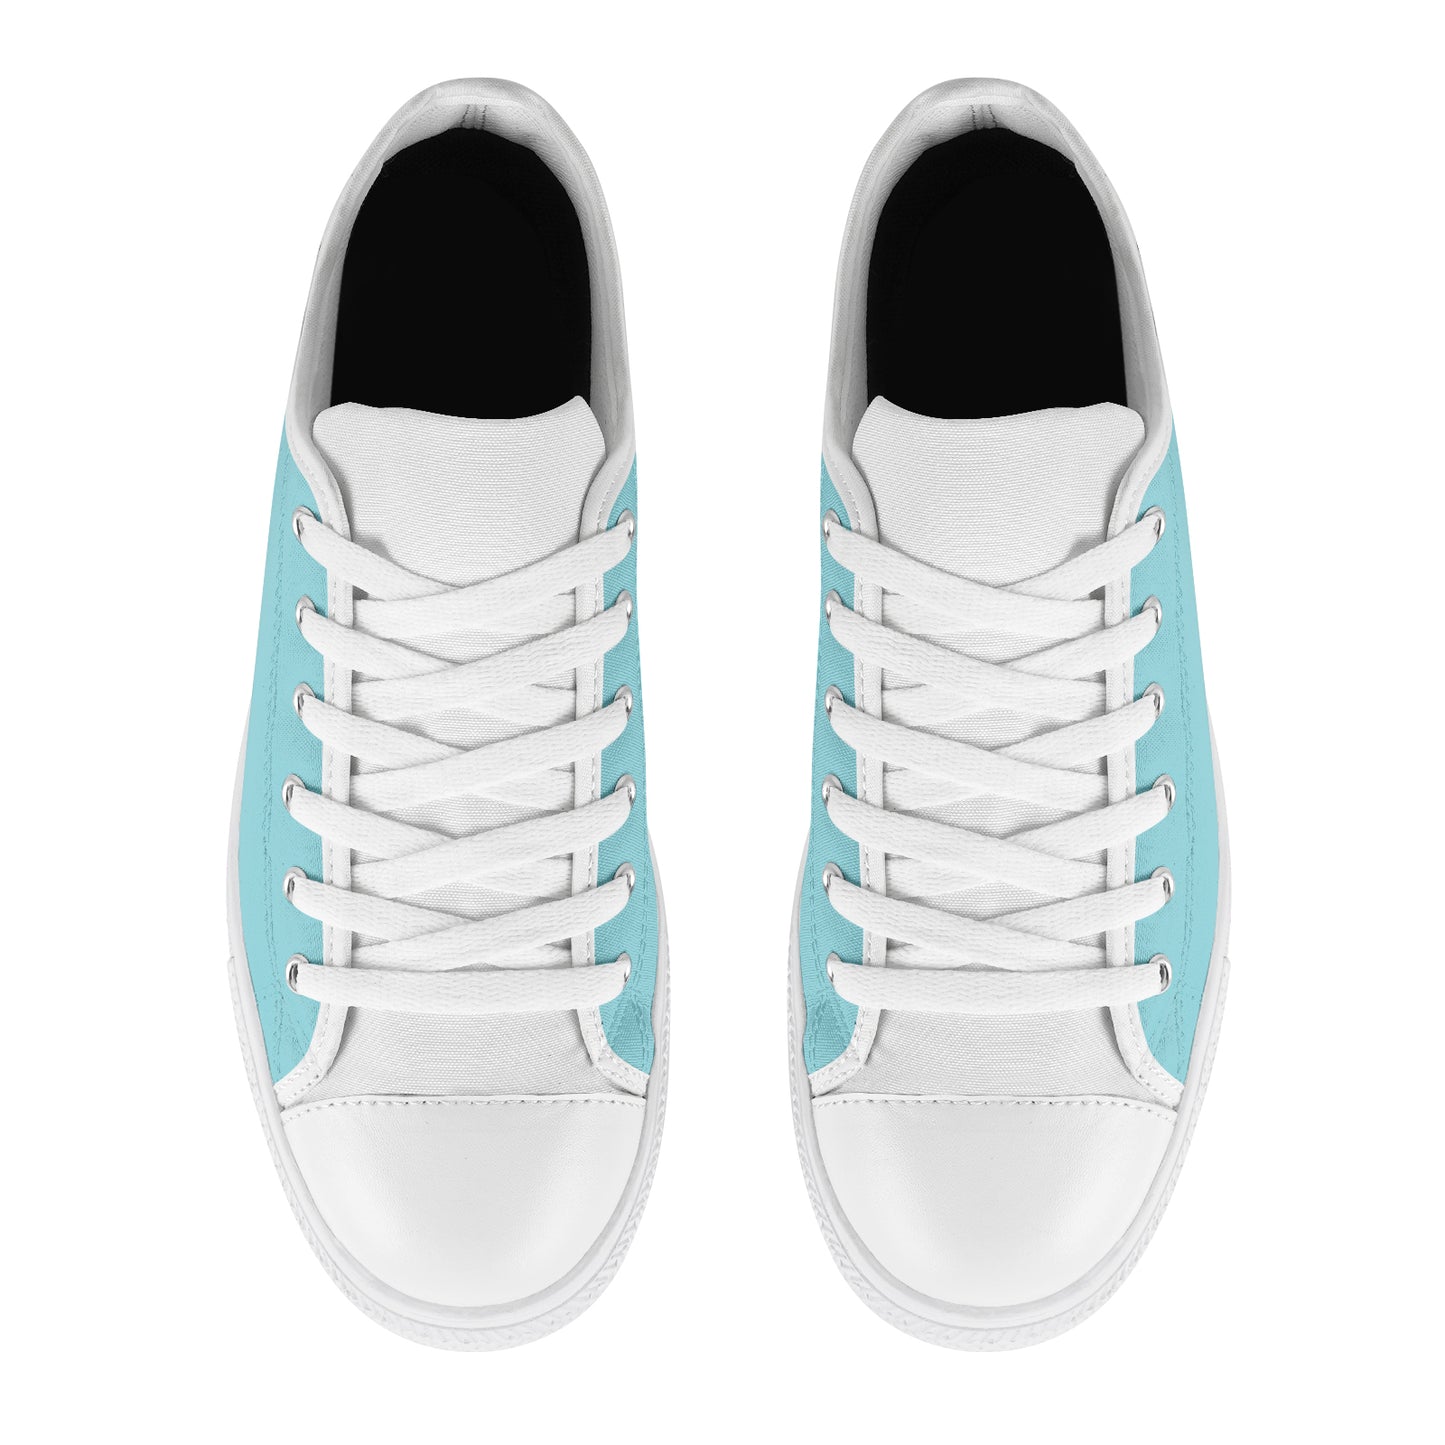 Women's Sneakers - Turquoise